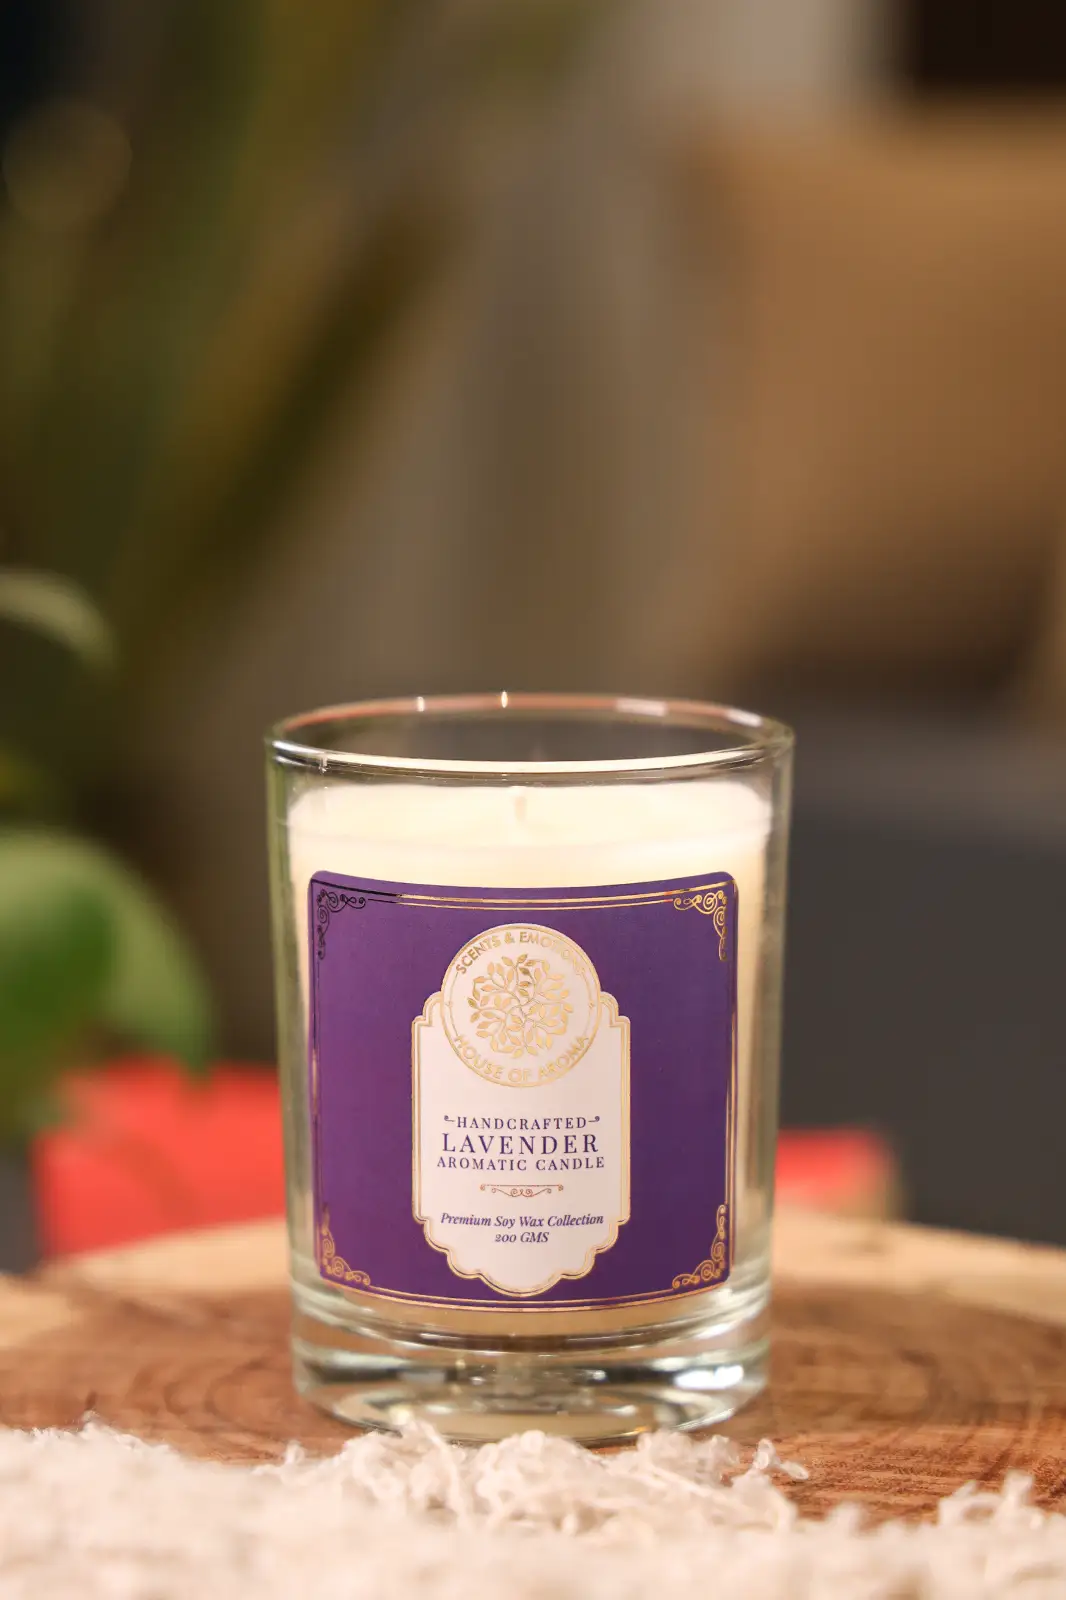 lavender natural wax scented candle jar, scented jar candle, Jar candle, candles with scent, aromatic candle, soy wax candle, fragrance candle, scented candles fragrances, best candle scents, best perfume candles, soy candle, candles and scents, candle with scent, candles aromatic, scents in candles, Aromatic candles, best fragrances candles, soy wax candles, fragrance candle, candles with fragrance, best fragrance candles, best candles scented, fragrance candles online, House Of Aroma